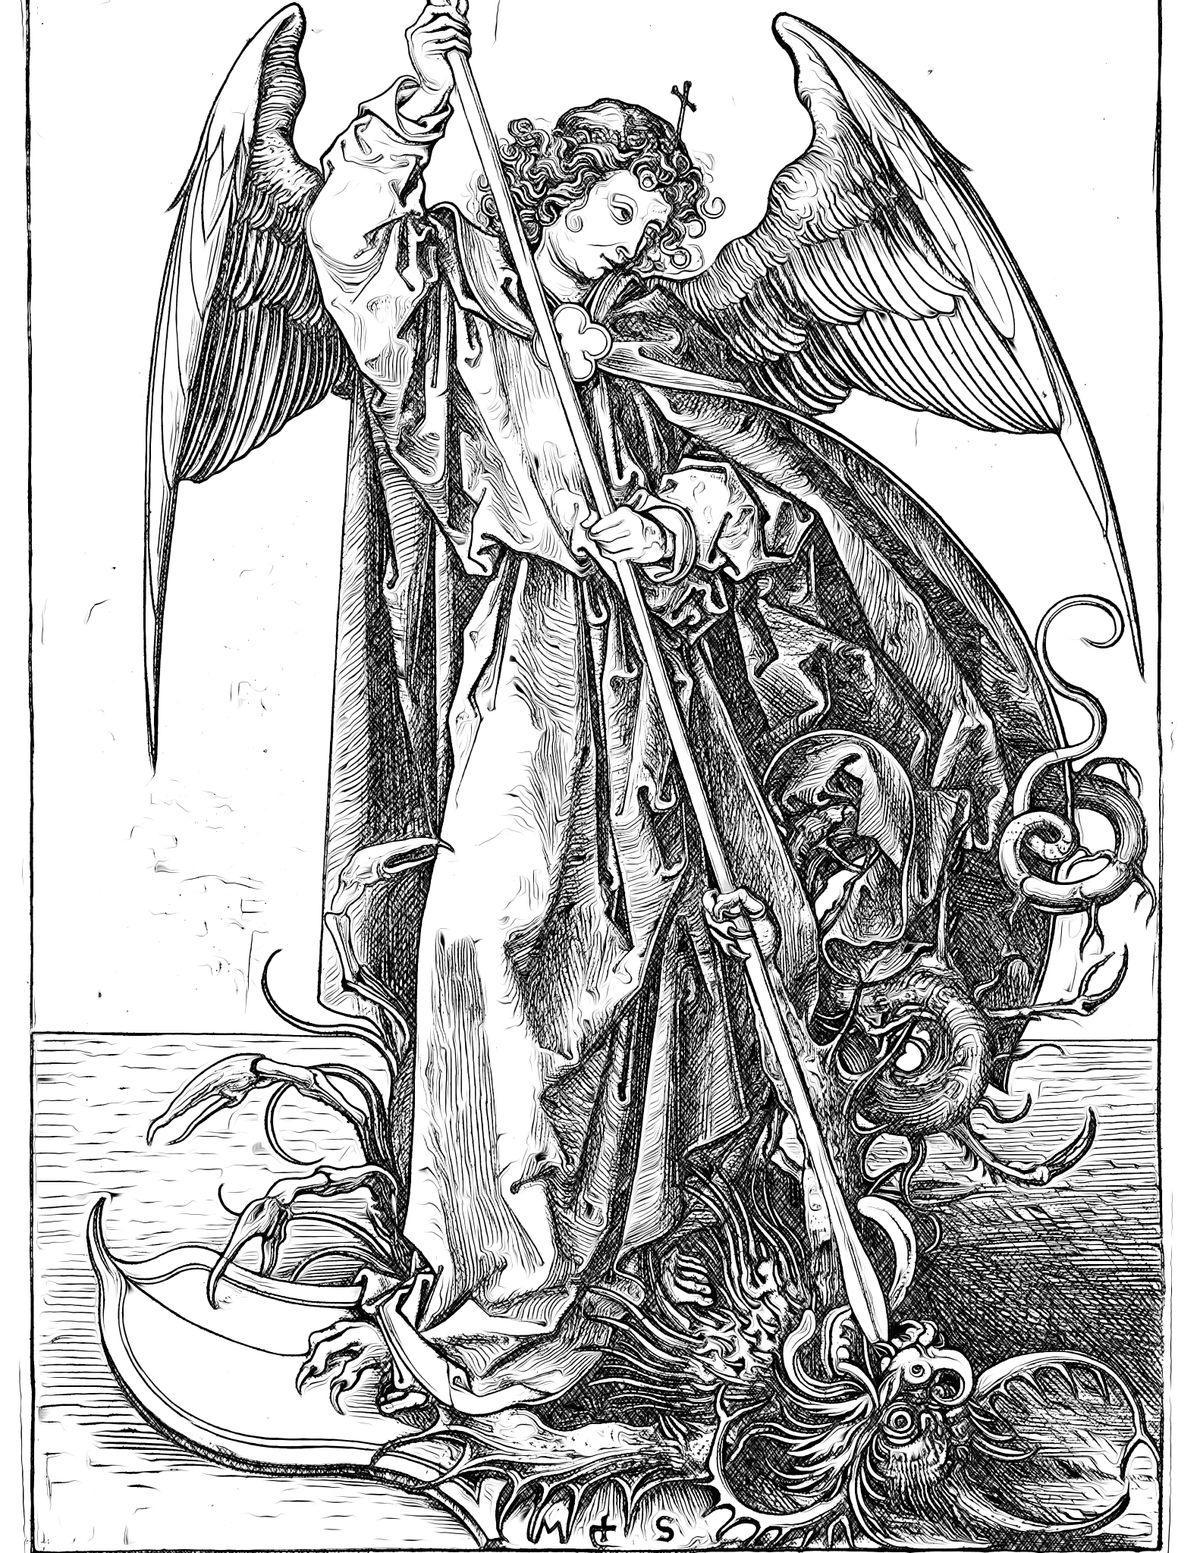 The Archangel Michael Piercing the Dragon - Catholic Coloring Page